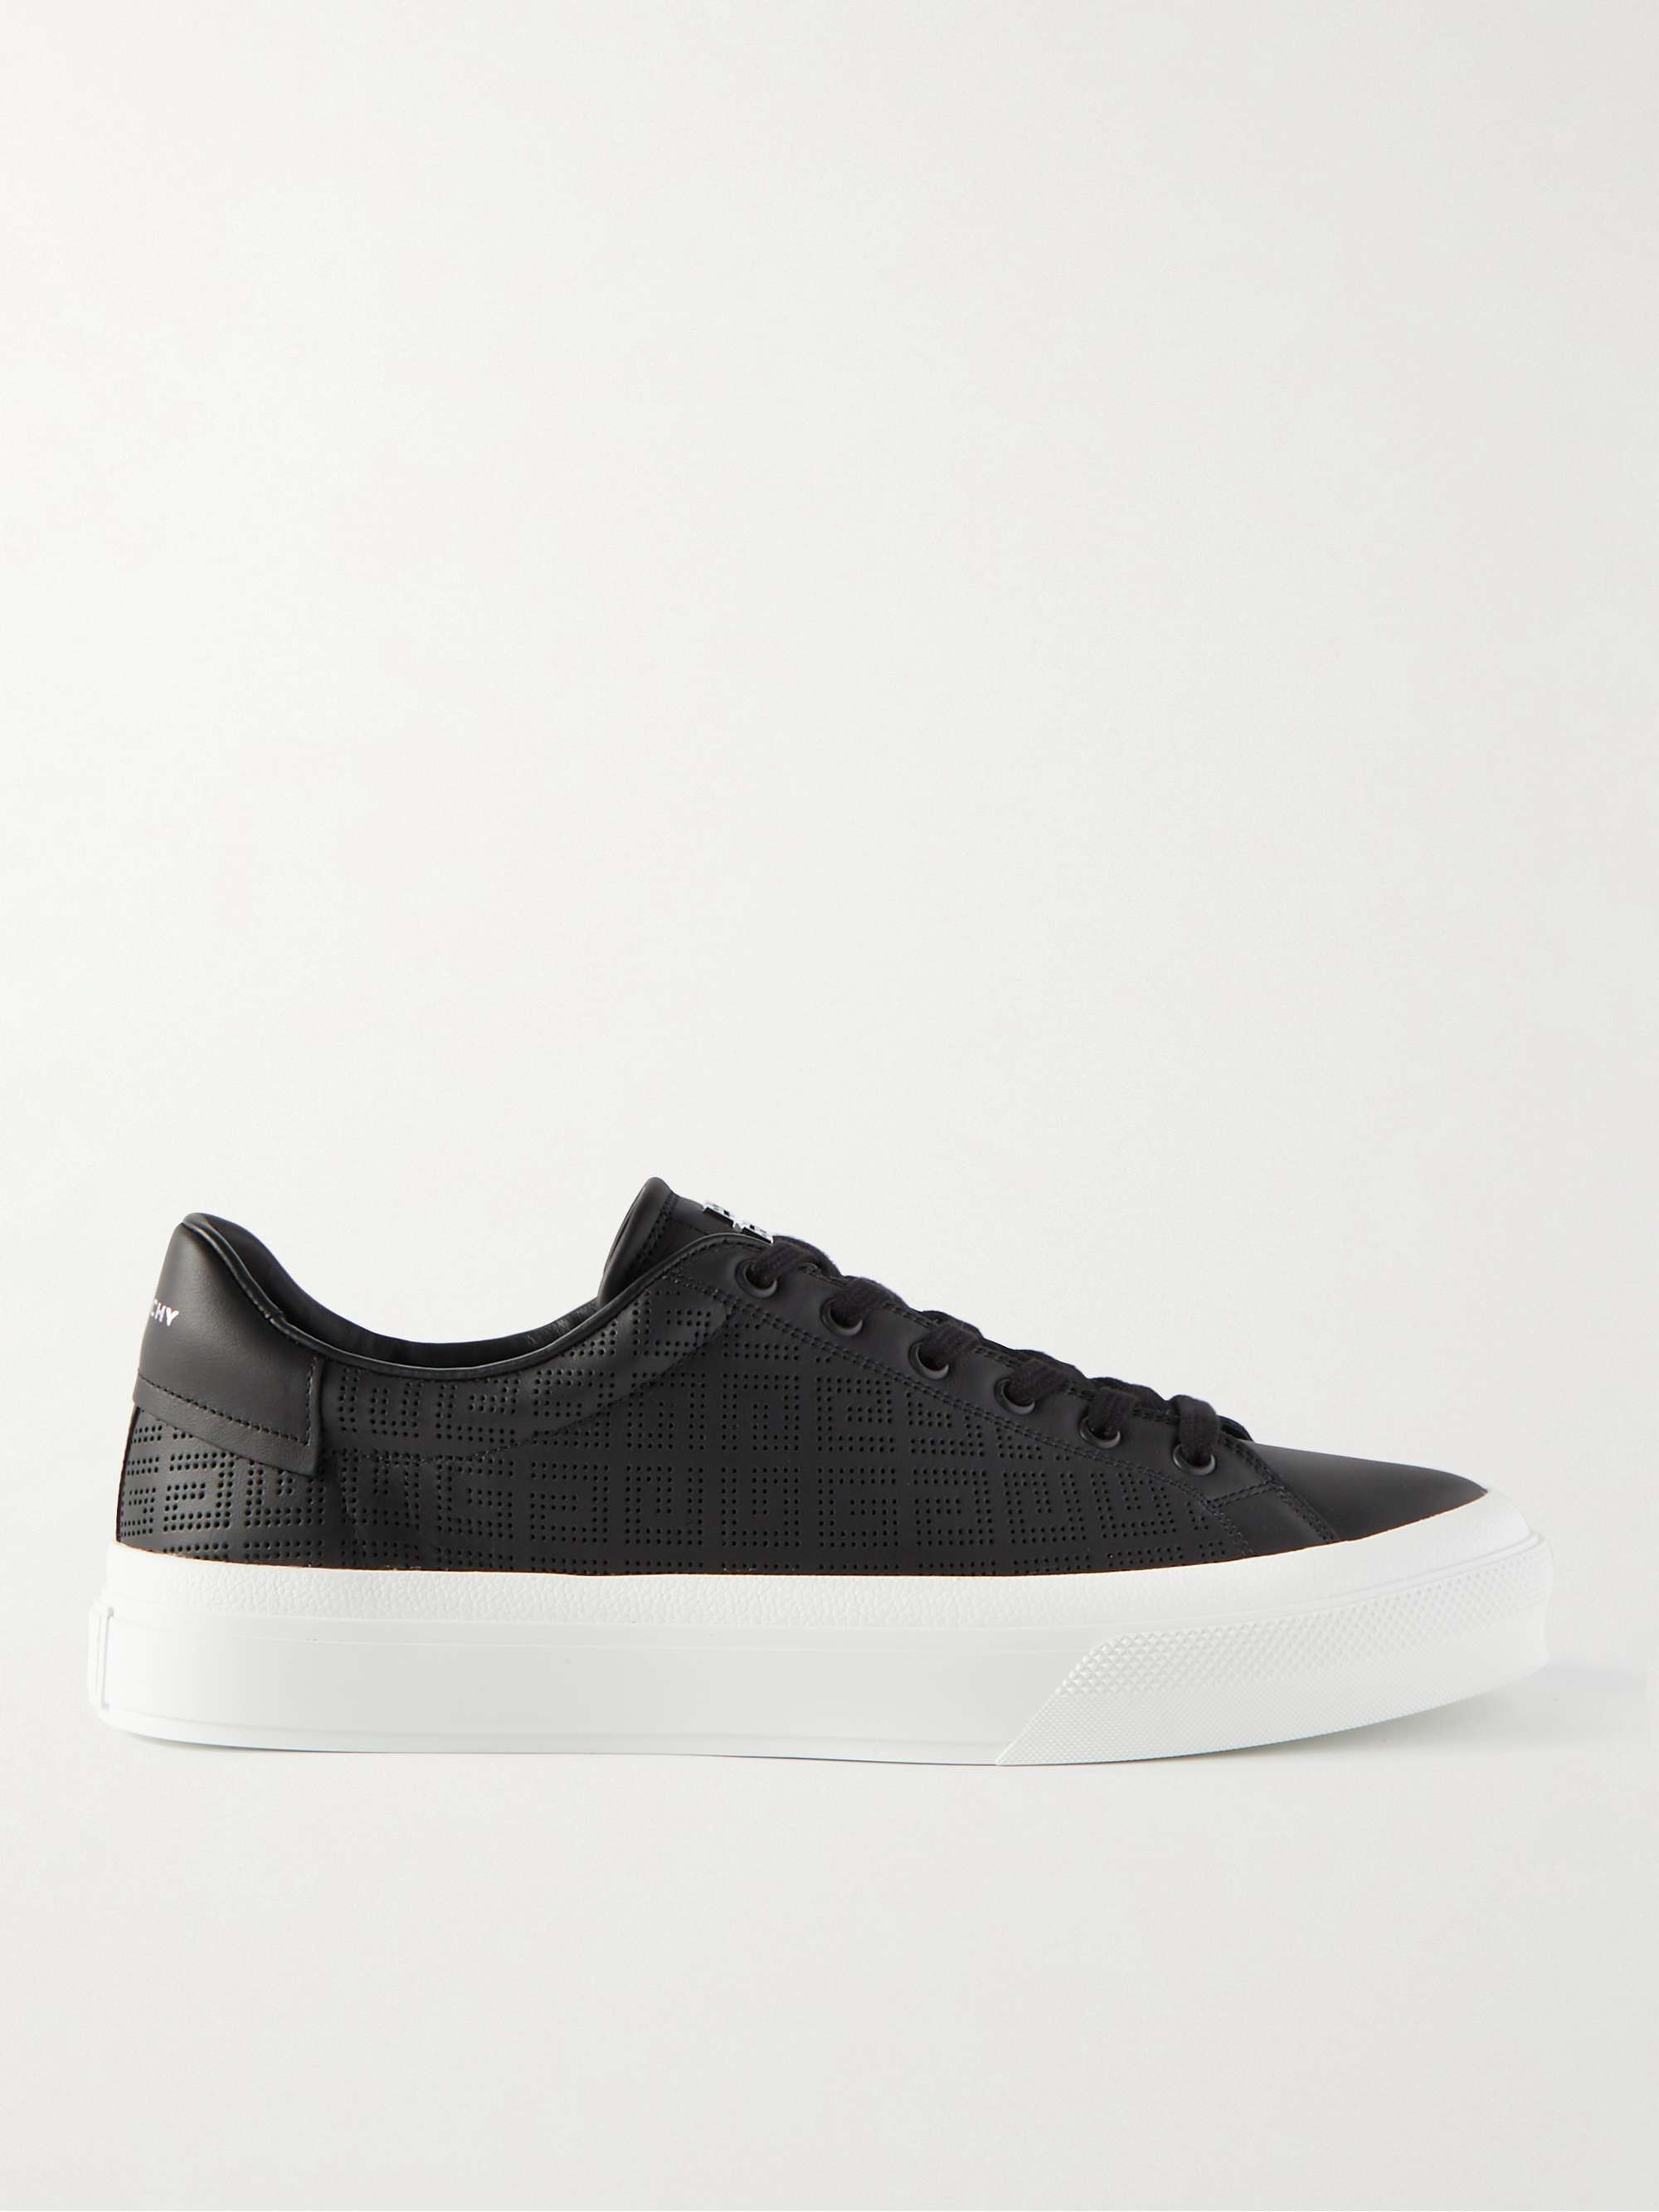 GIVENCHY Perforated Leather Sneakers for Men | MR PORTER